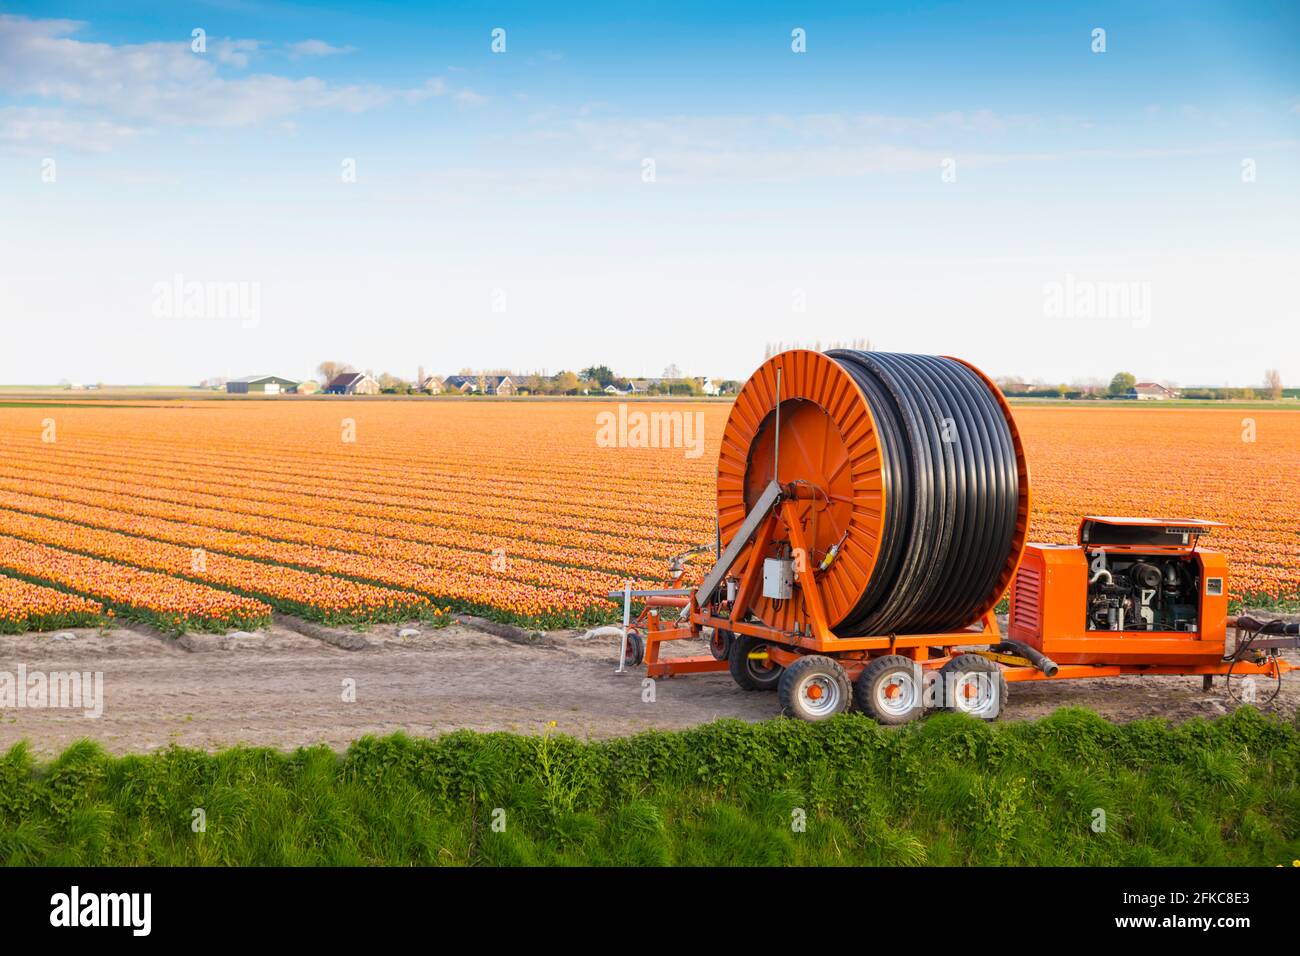 ornage tlip fiels with irrigation system Stock Photo